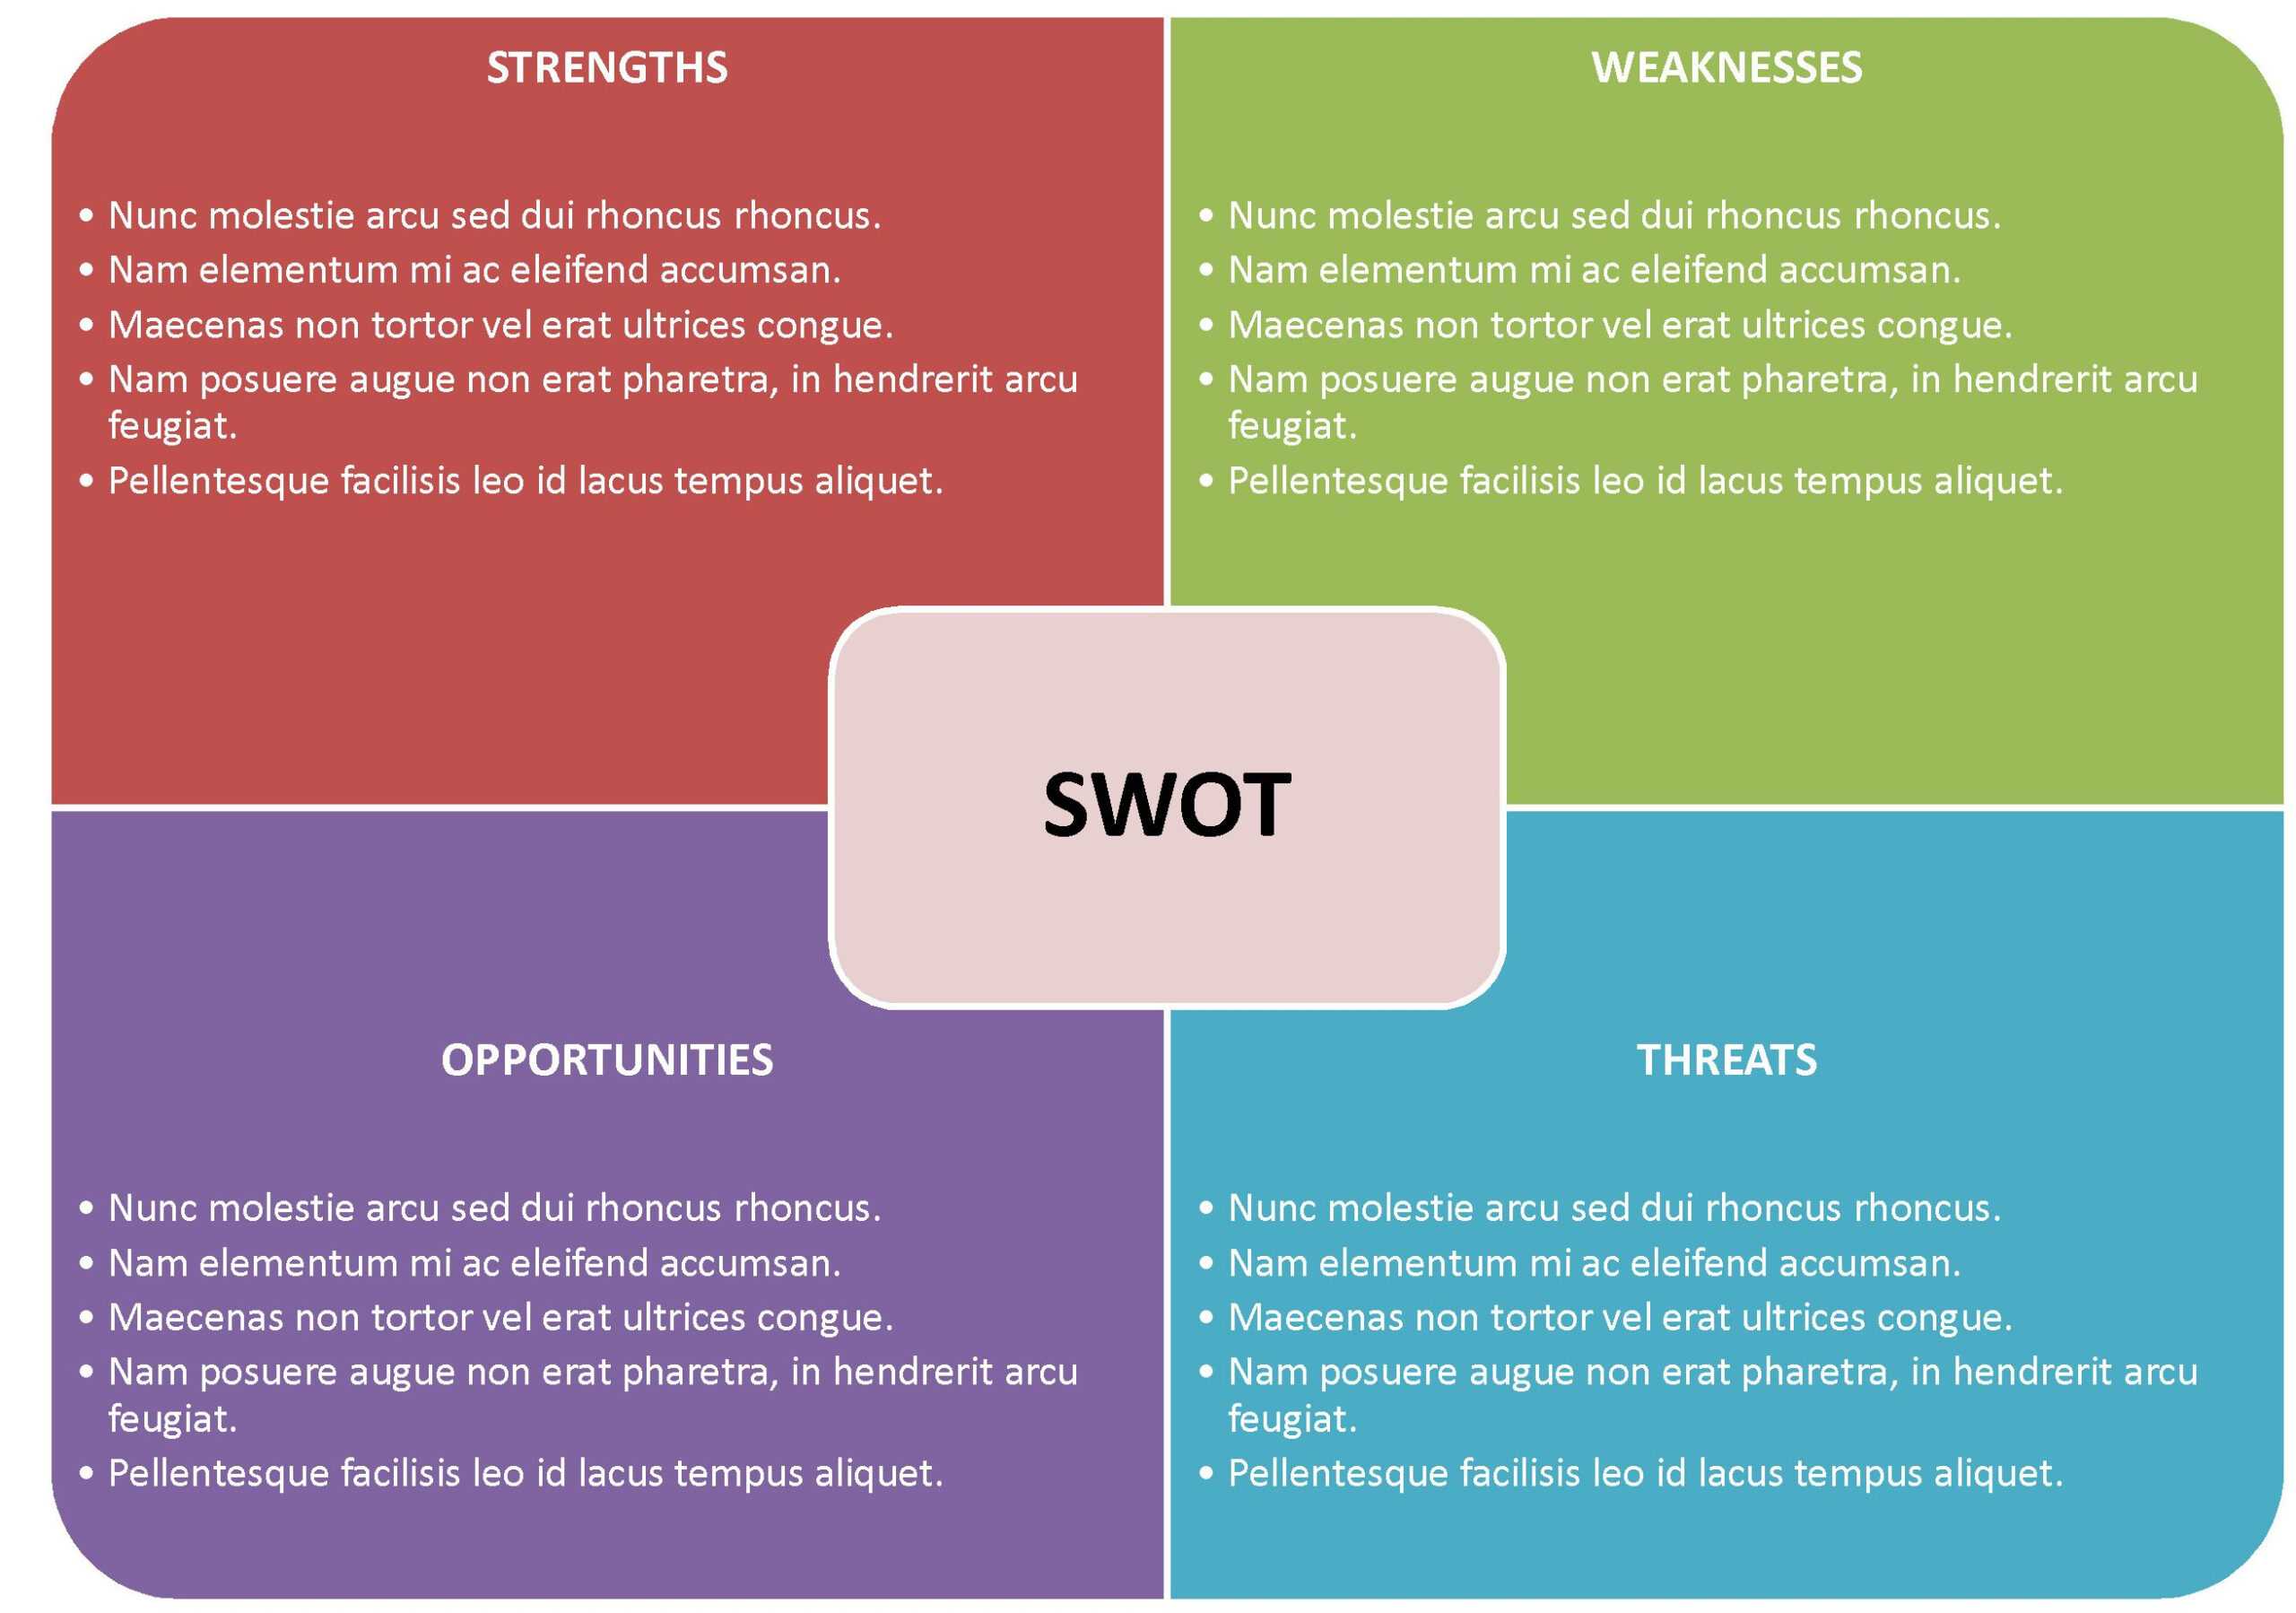 Ede79 Free Swot Template Word | Wiring Resources For Swot Template For Word